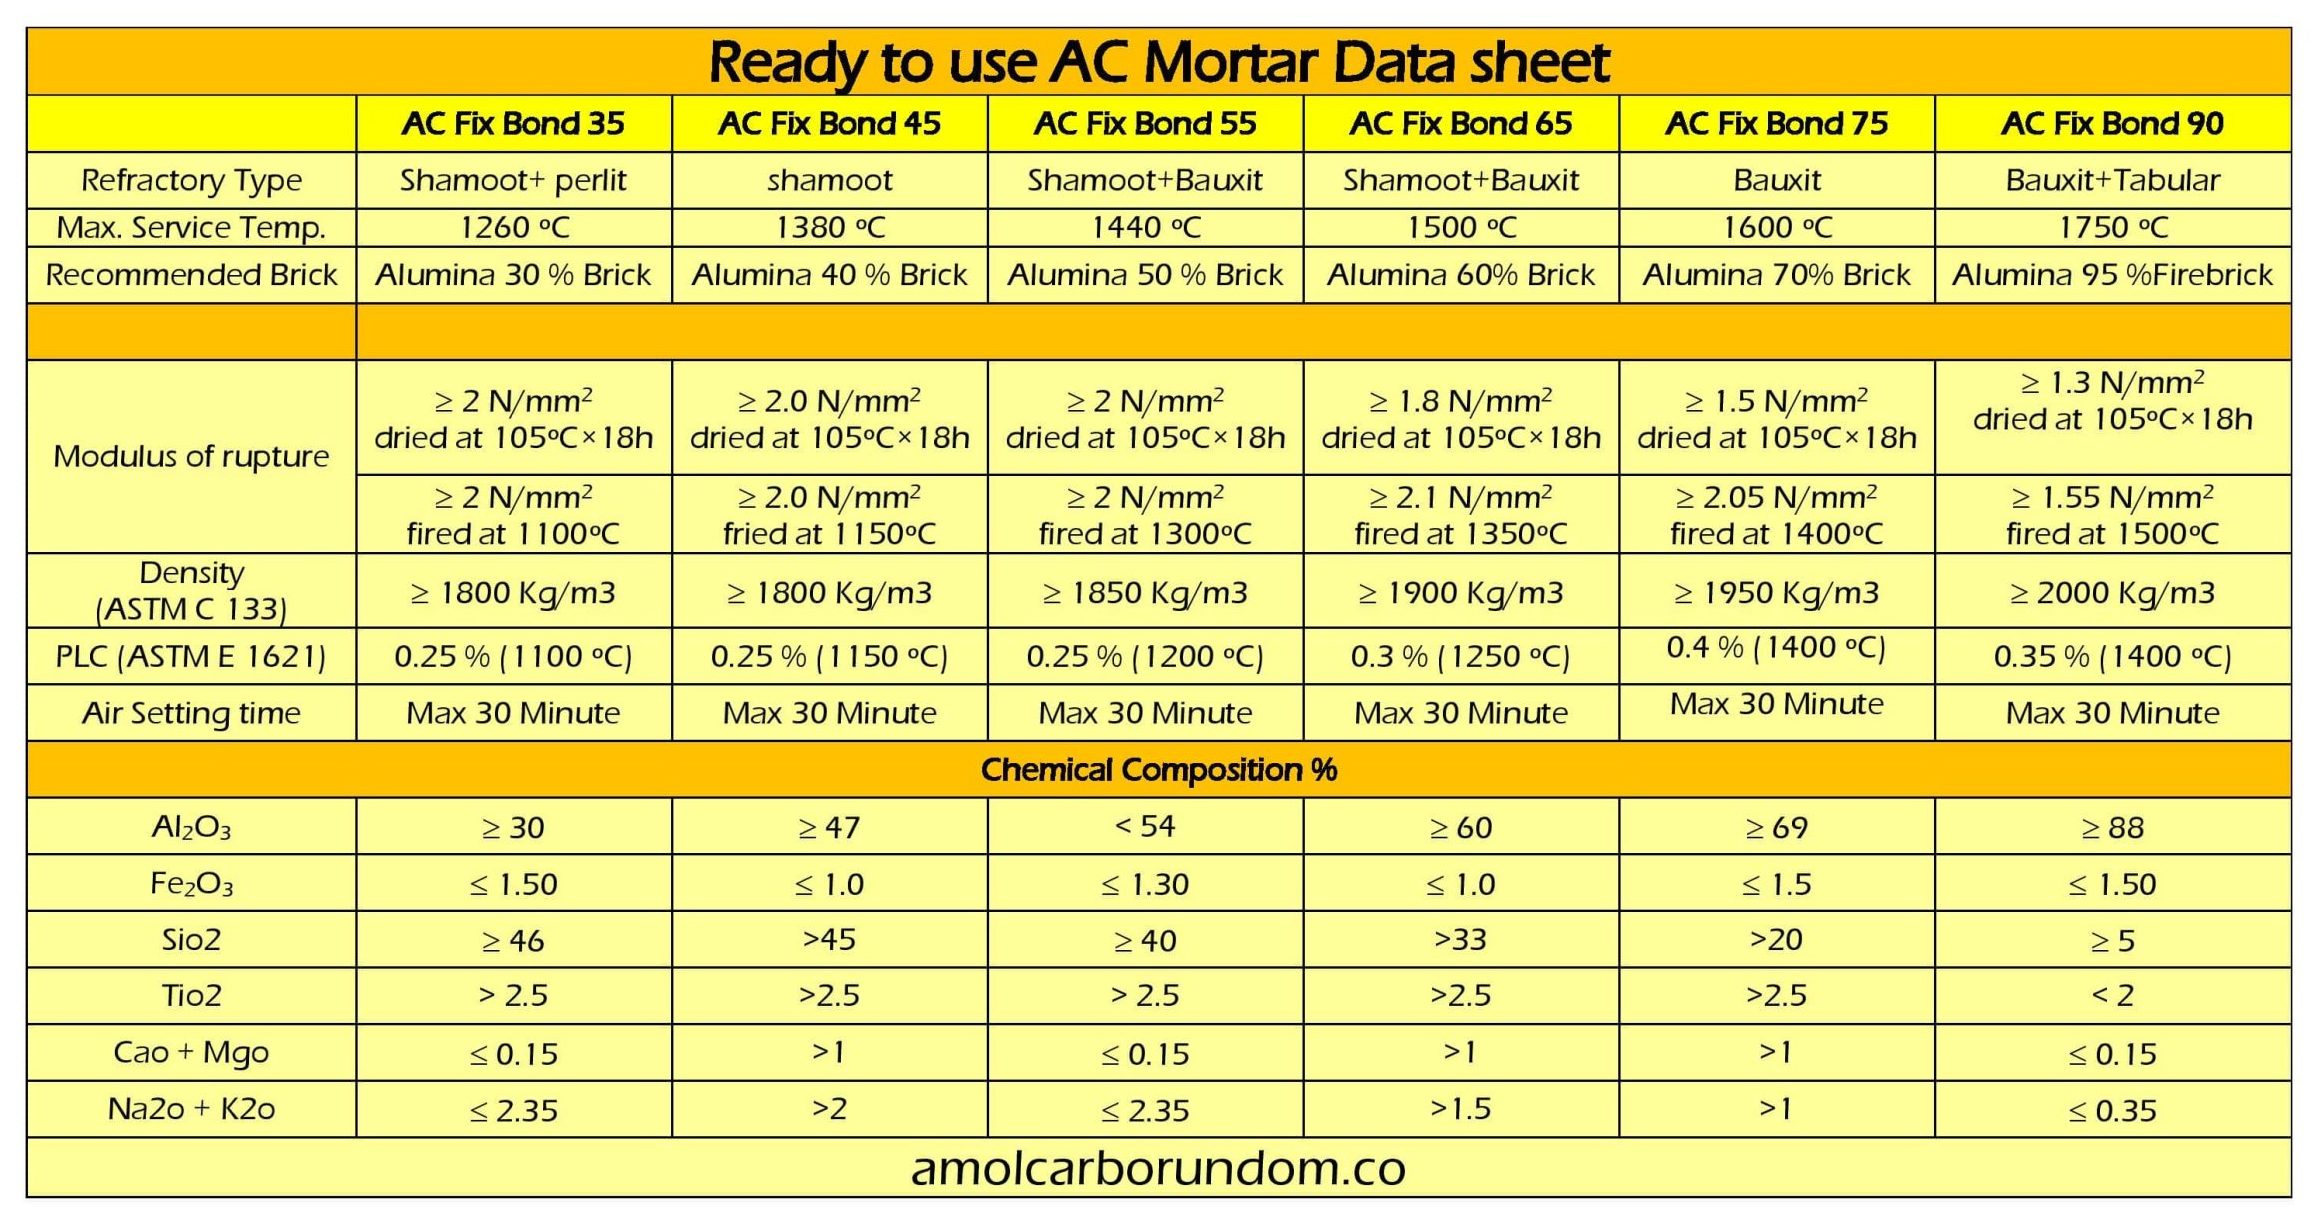 Technical specifications of ready-to-use refractory mortar of Amol Carburendam Company